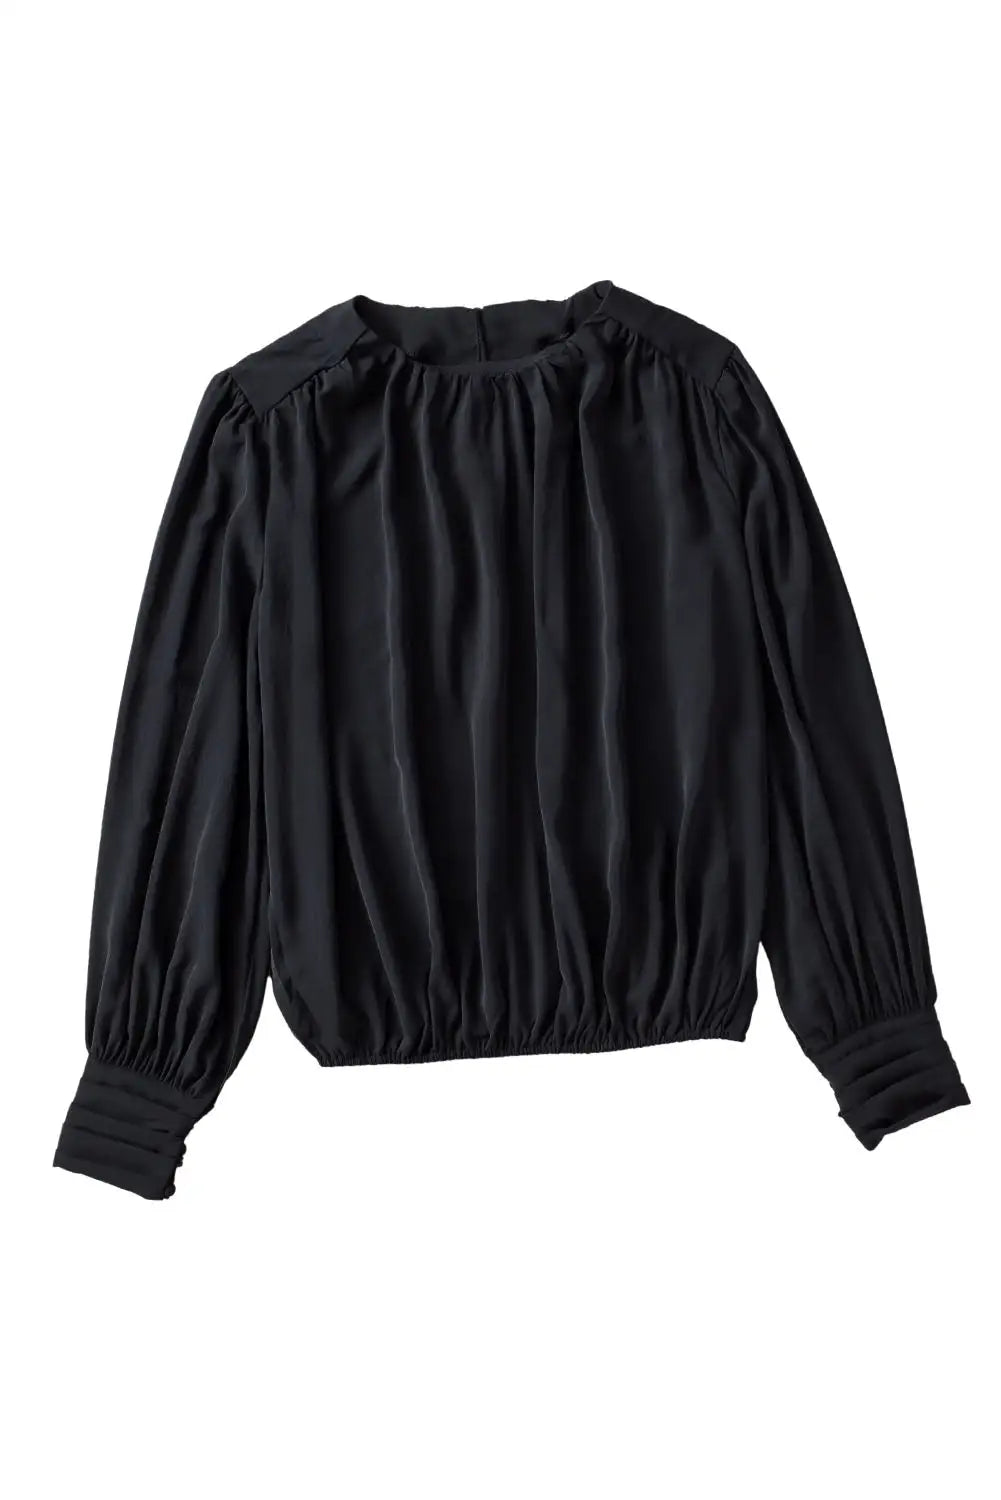 Black padded shoulder buttoned cuffs pleated loose blouse - blouses & shirts